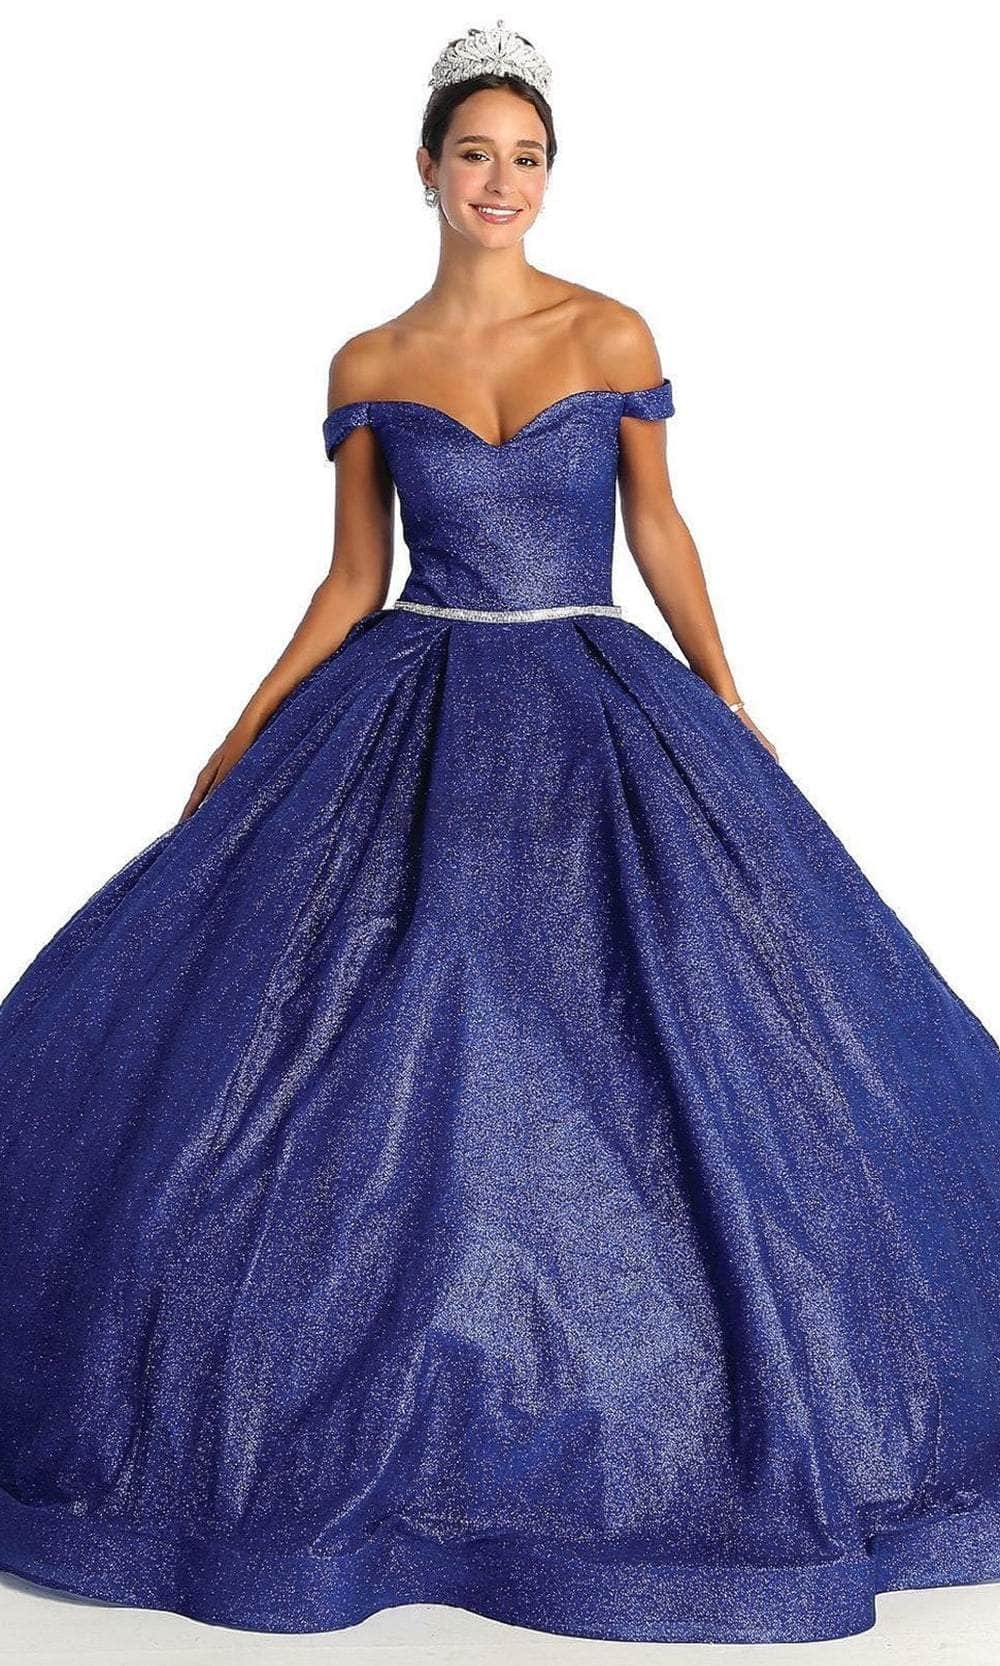 Image of May Queen LK176 - Off Shoulder Glittered Ballgown